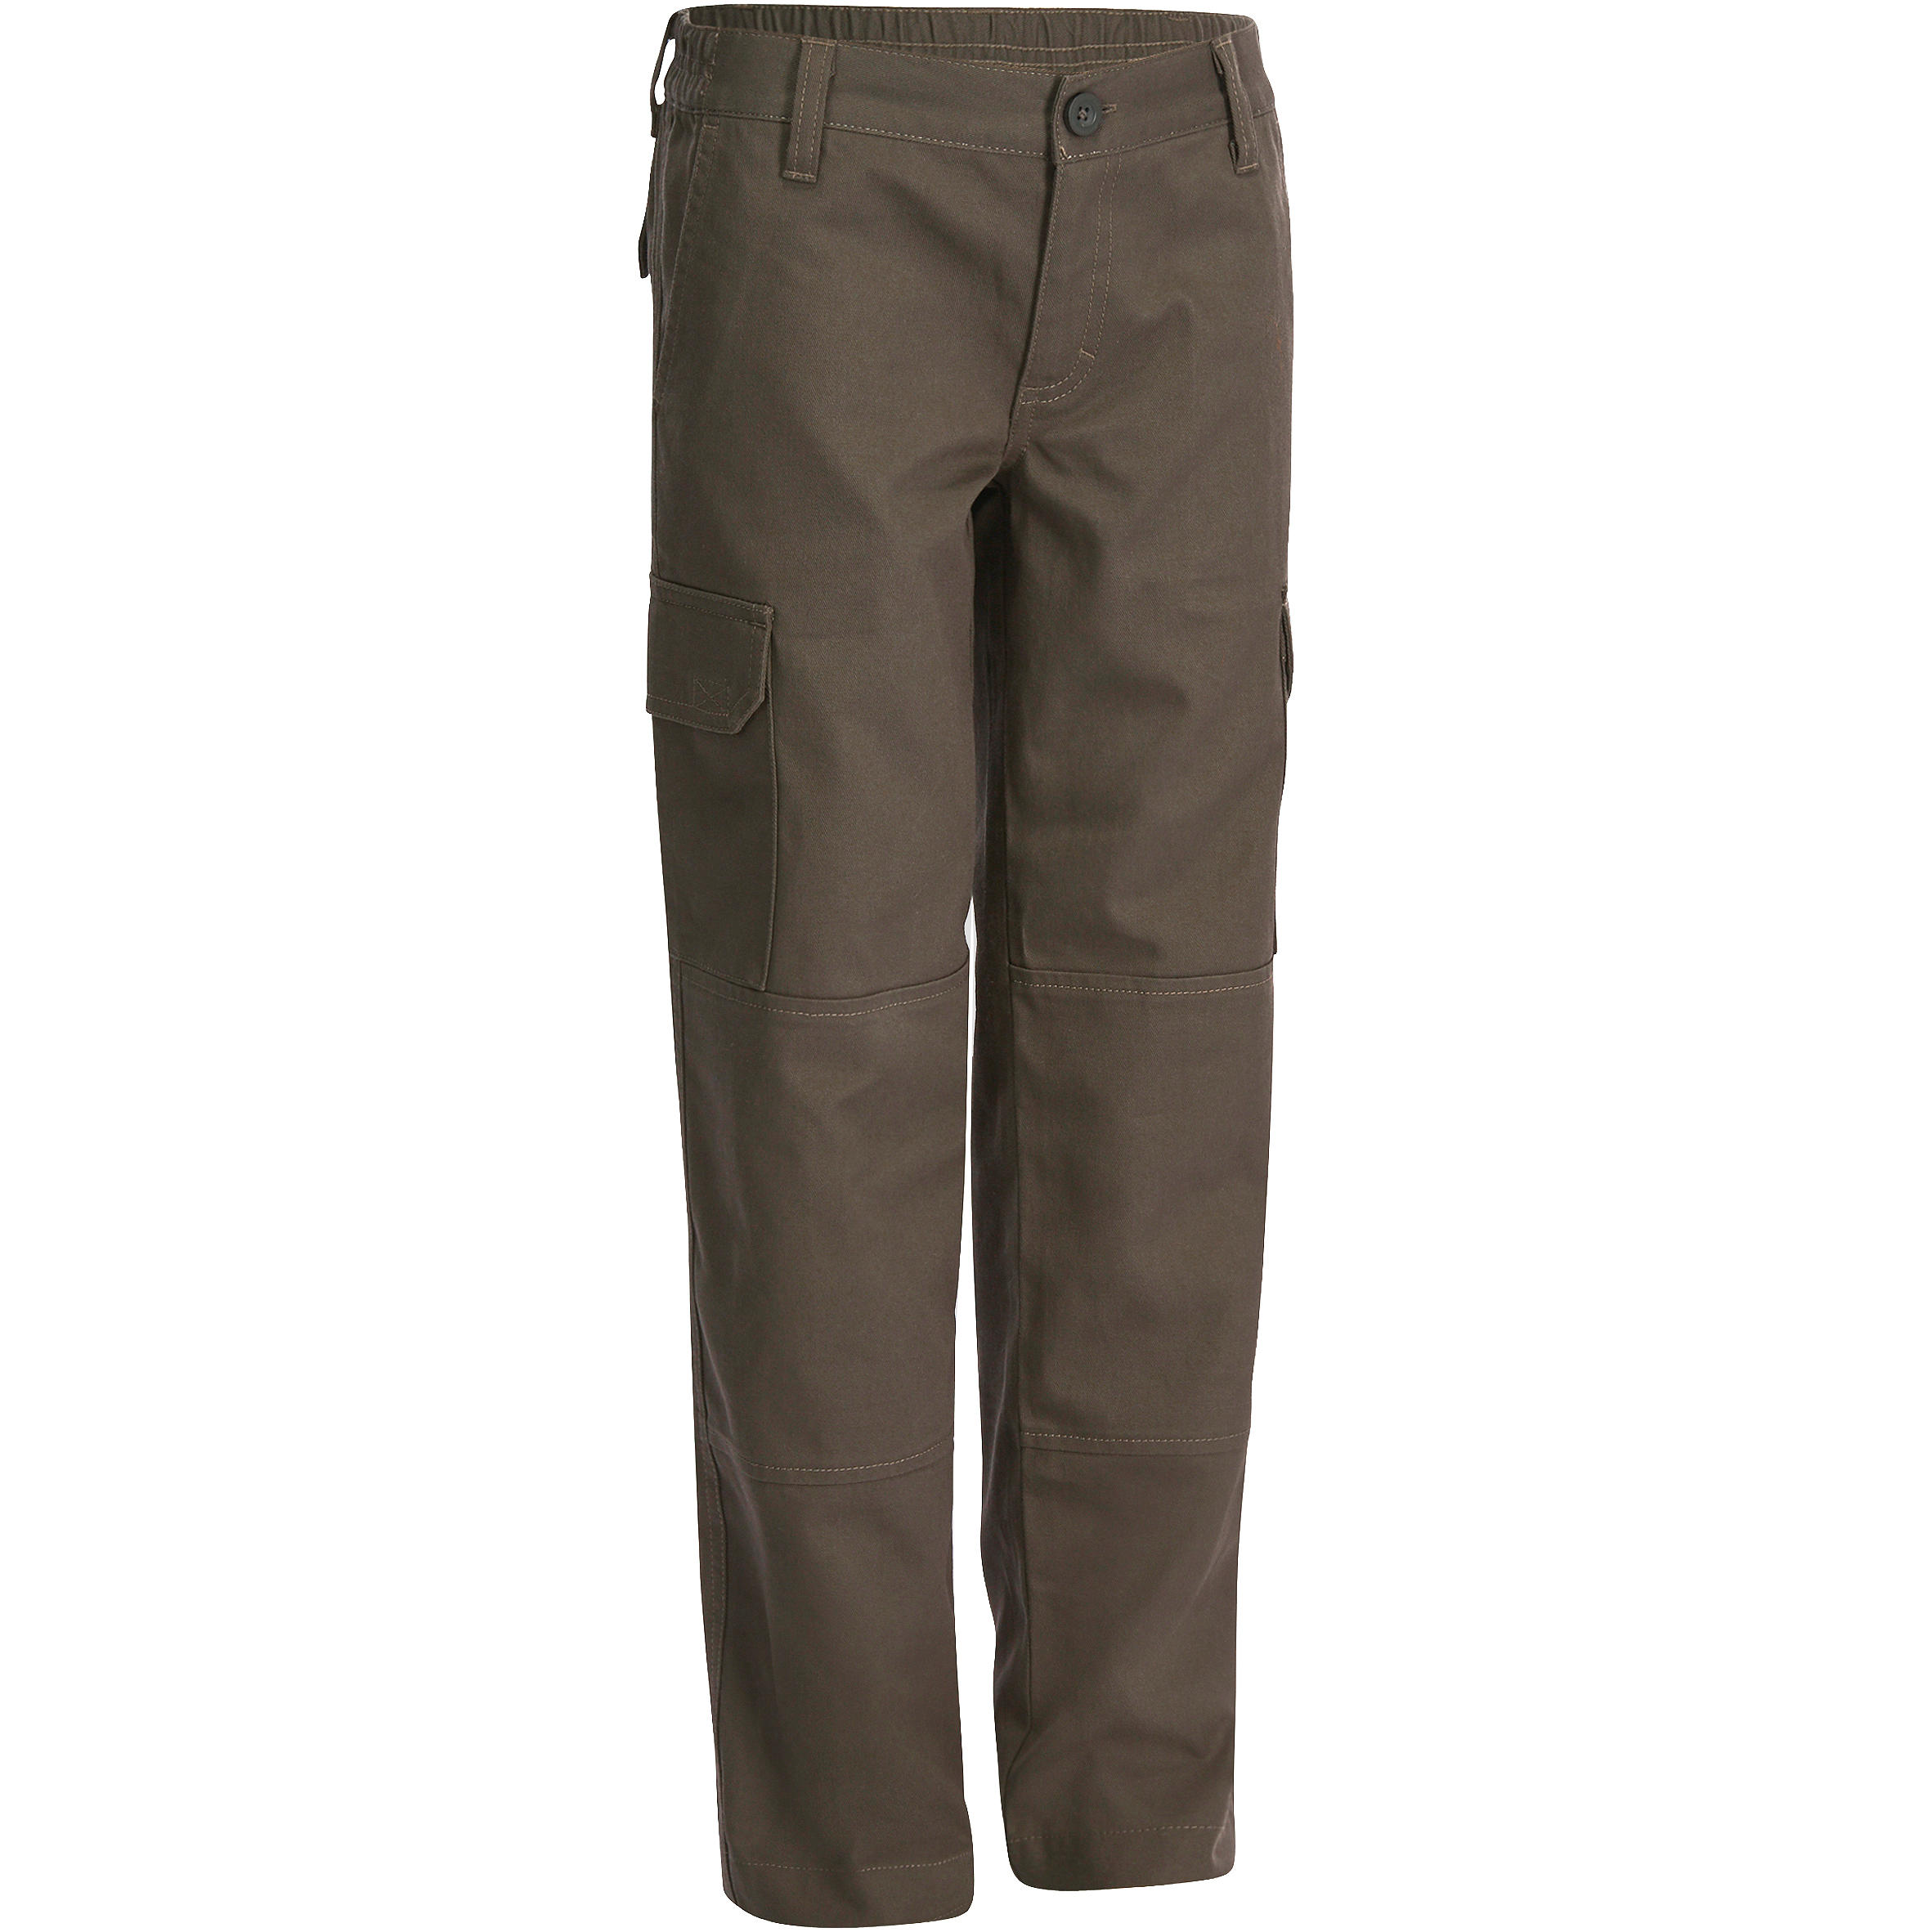 Decathlon Malaysia - Hello everyone! For your hunting activities we  recommend you to have this trousers. Made for fishing and observing nature.  Durable trousers (solid seams, lightweight cotton fabric, elasticated waist  for